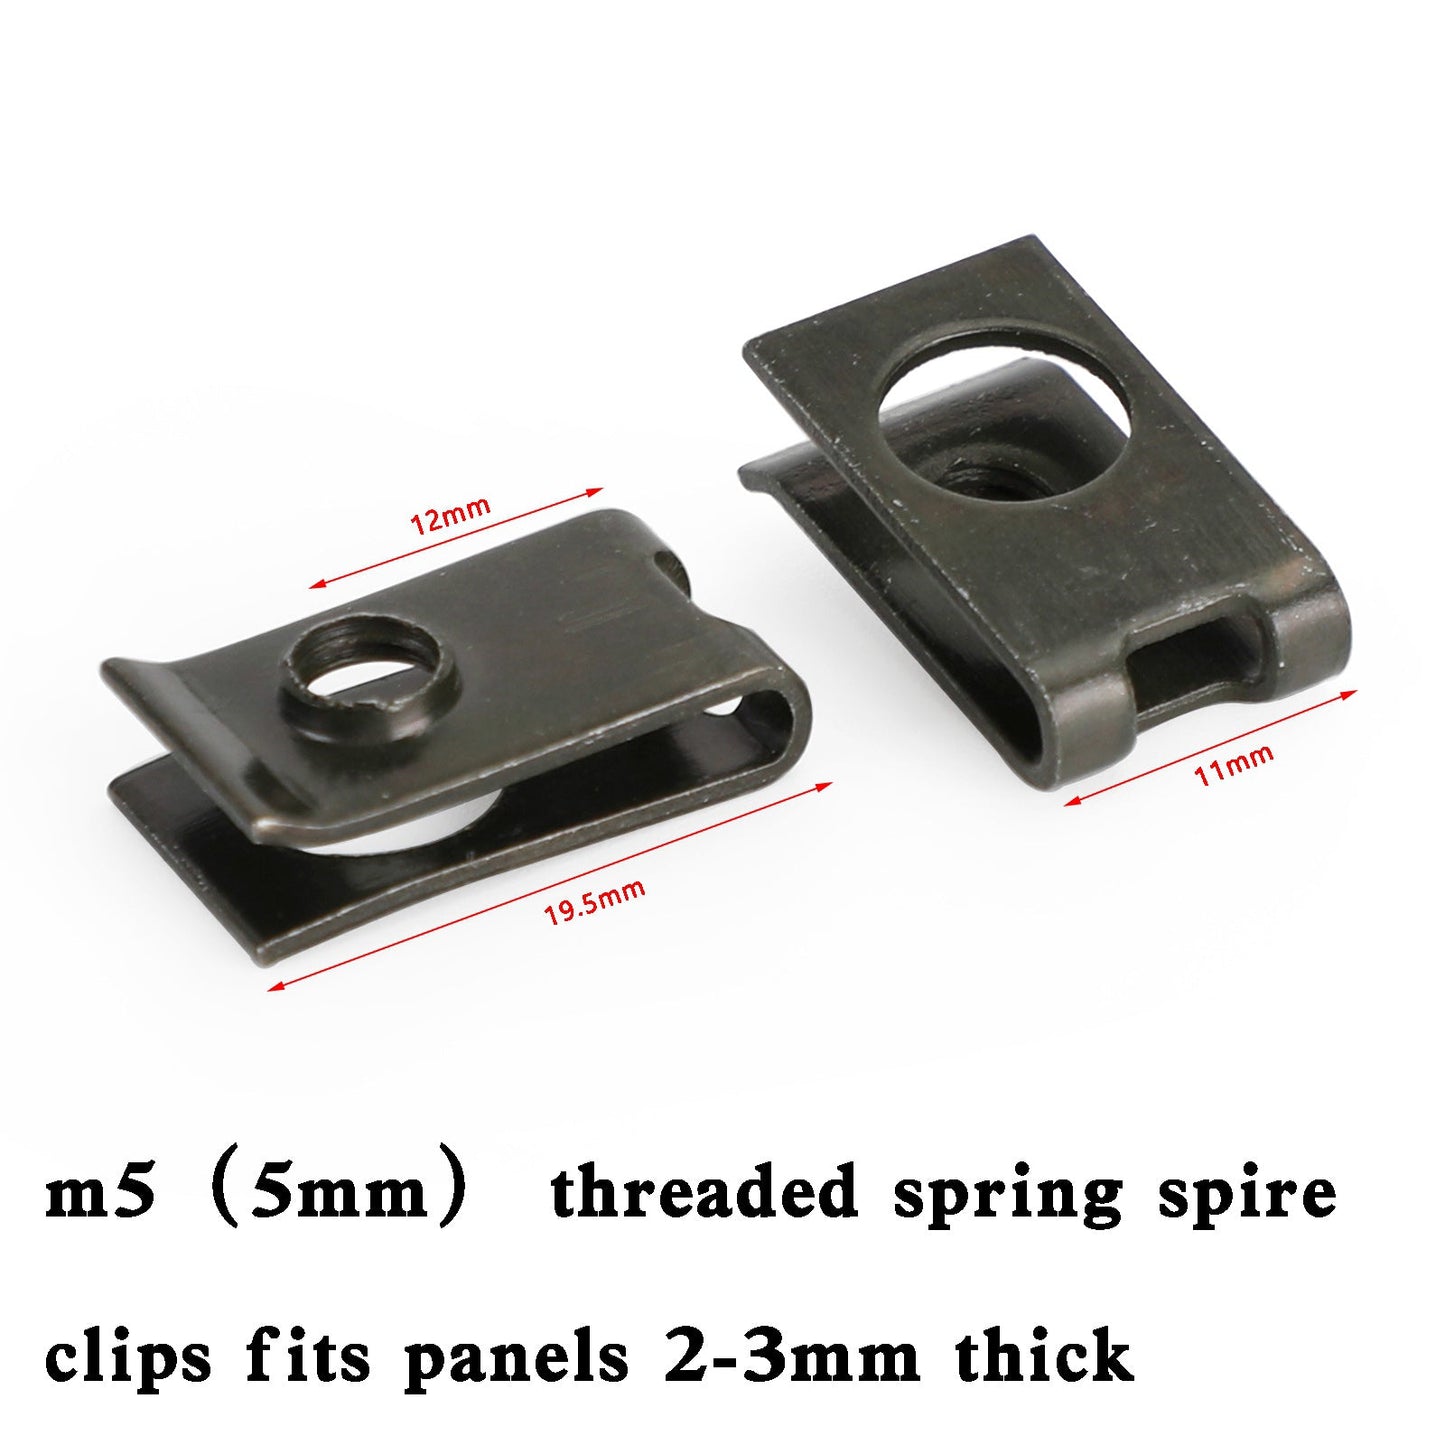 10x Small M5 5mm Motorcycle Fairing Spring Clips Speed Spire Nuts Clip U Nut